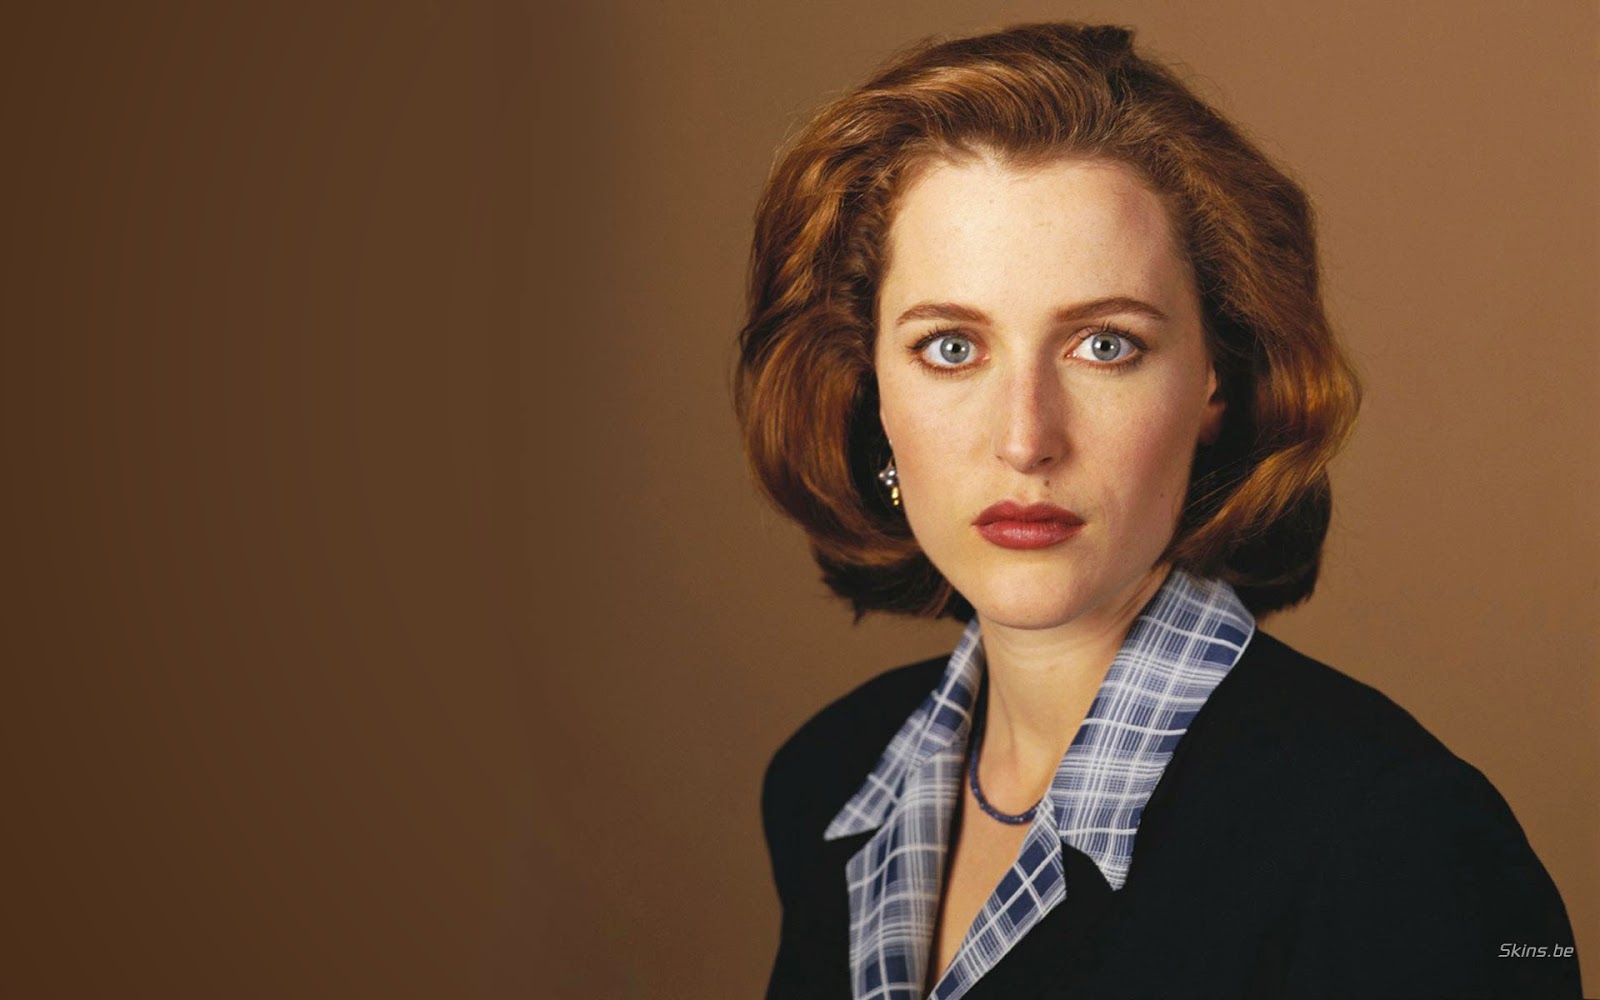 gillian anderson - Celeb Images 6